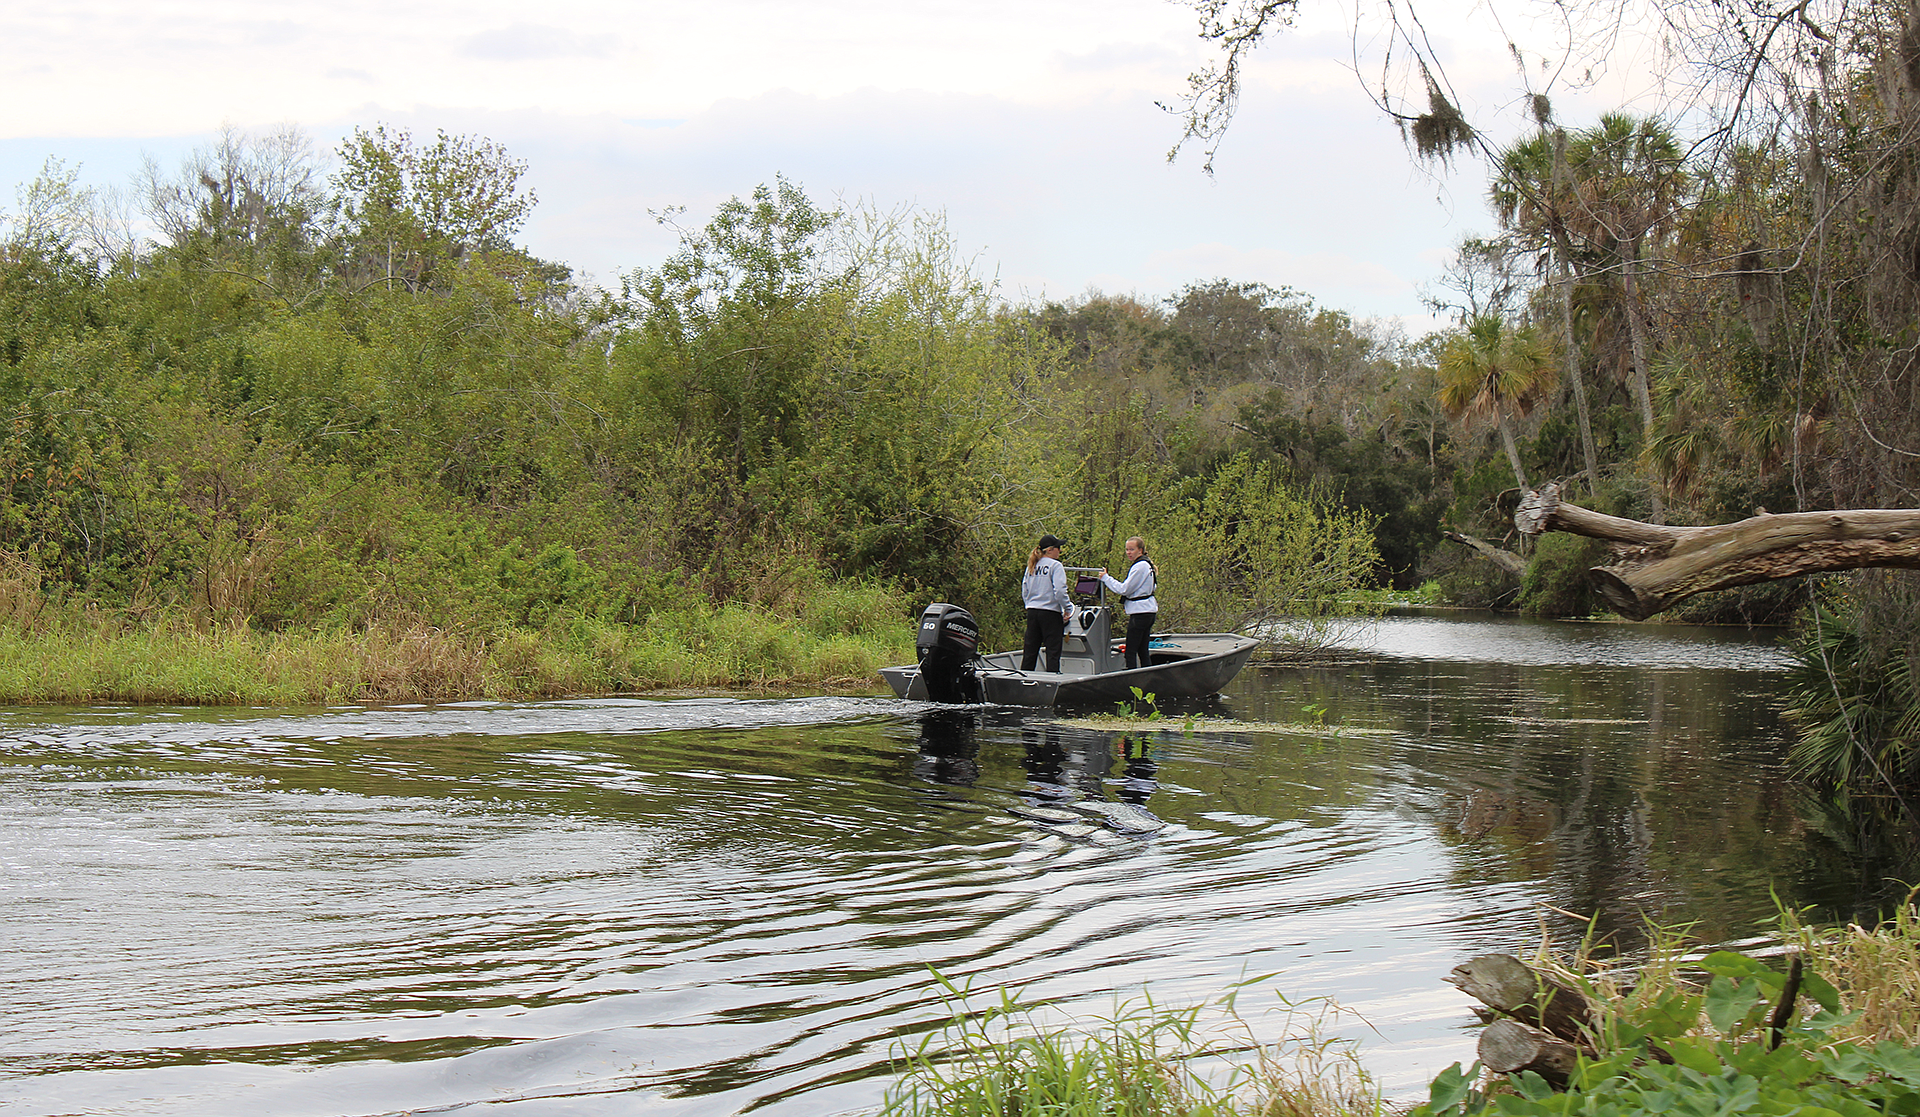 Biologists Kristen Peterson and Jamie Wolanin monitor the Braden River to check for Old World Tape Grass growth.